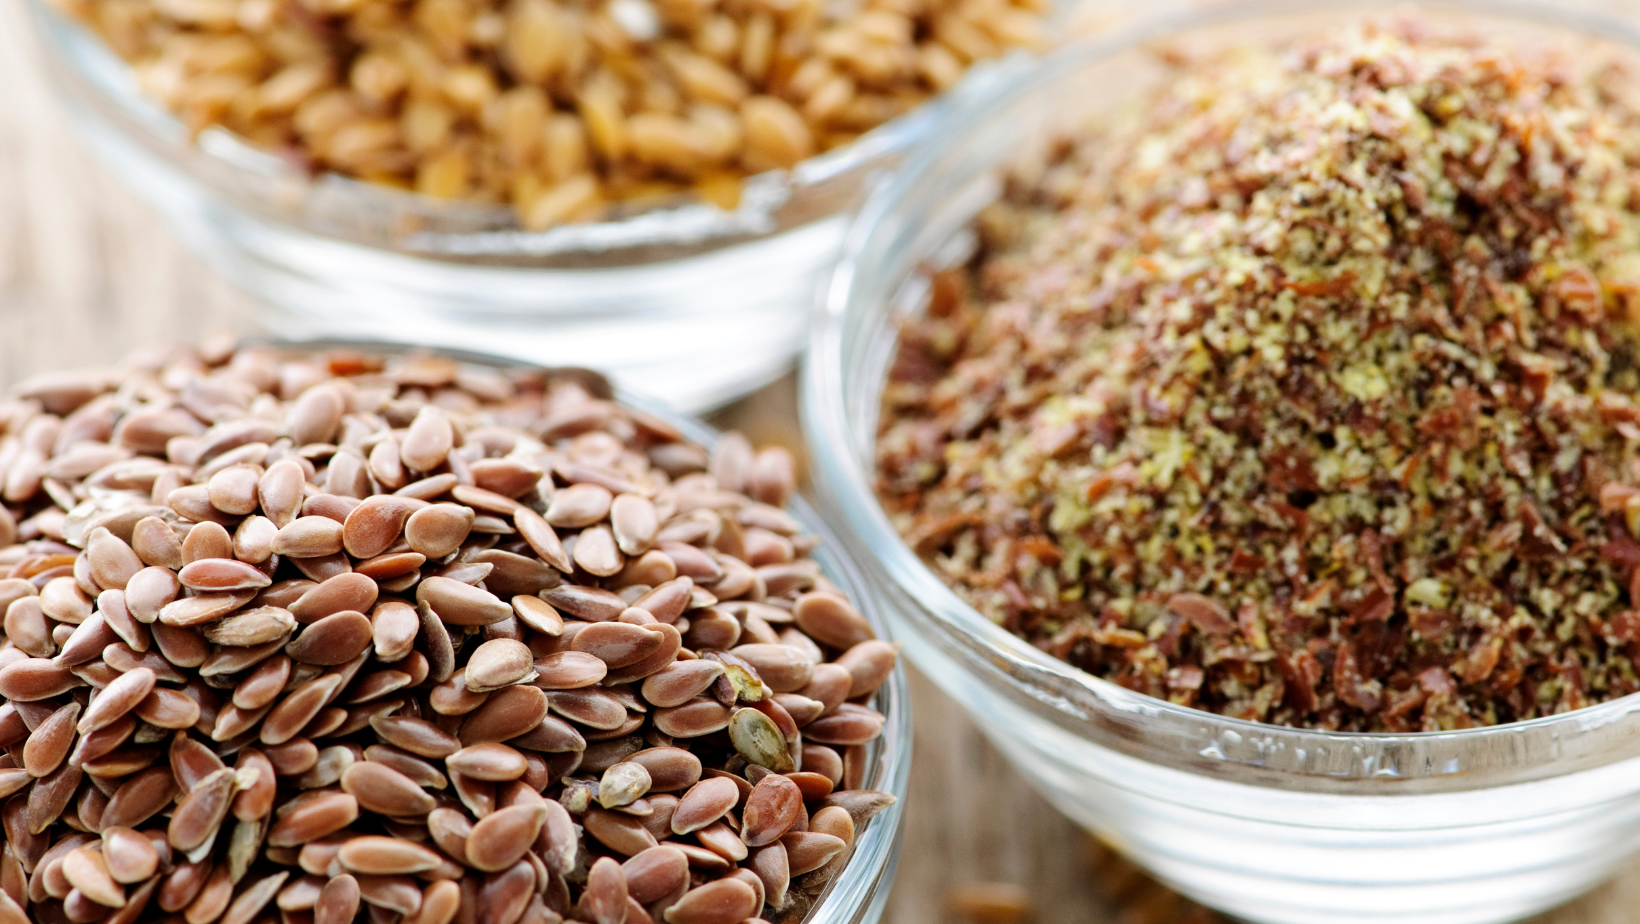 Seed Cycling for Hormone Balance